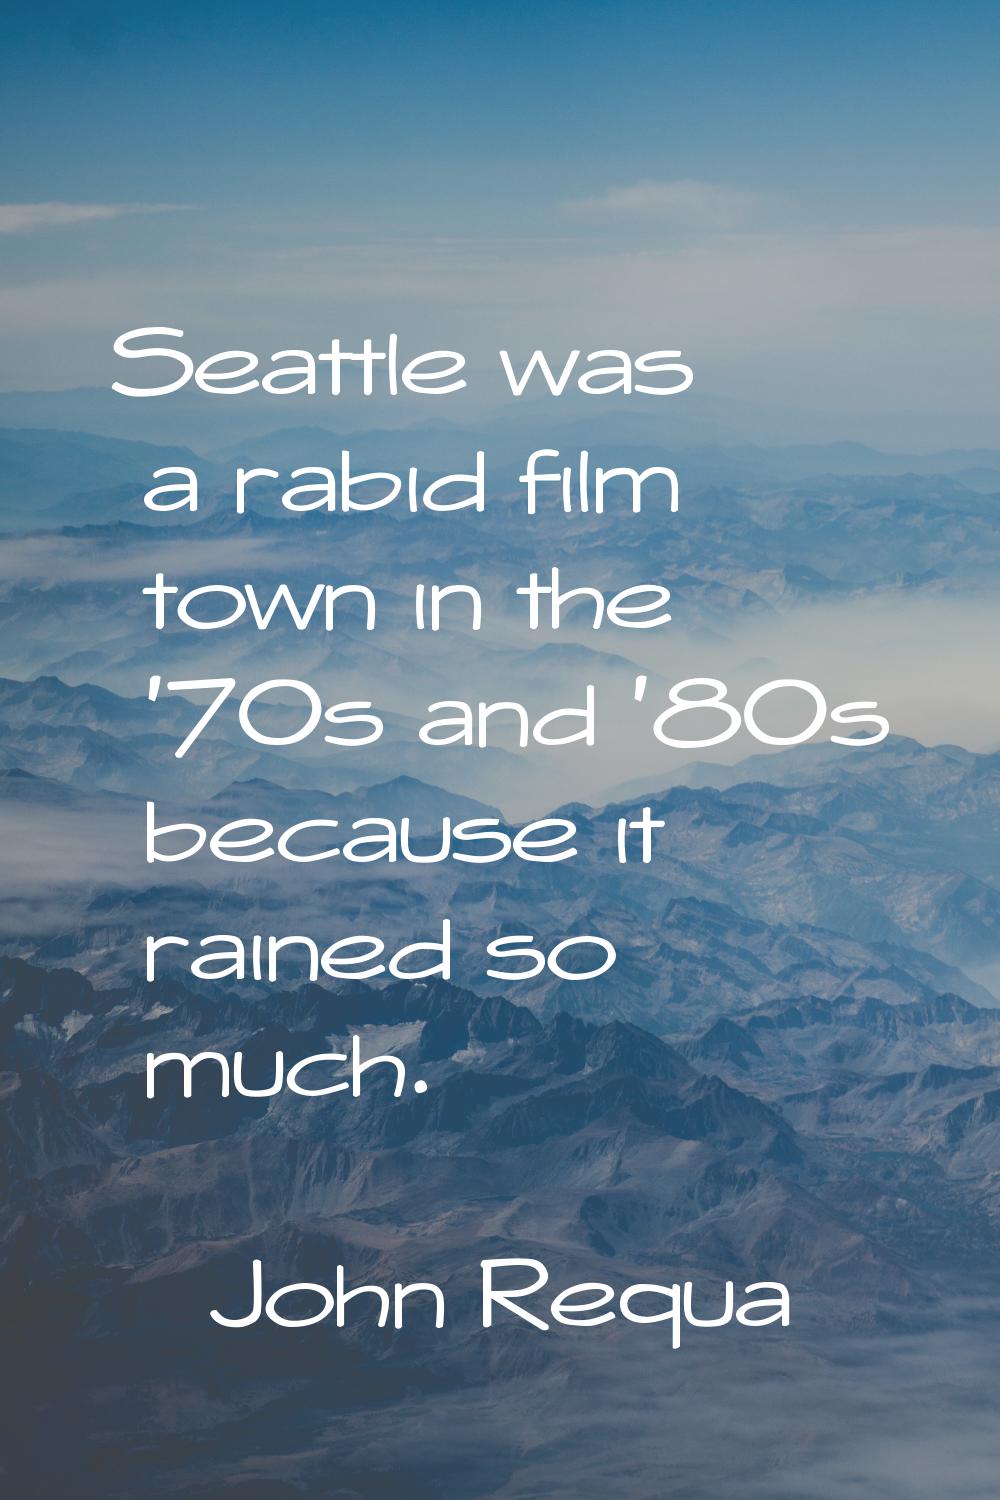 Seattle was a rabid film town in the '70s and '80s because it rained so much.